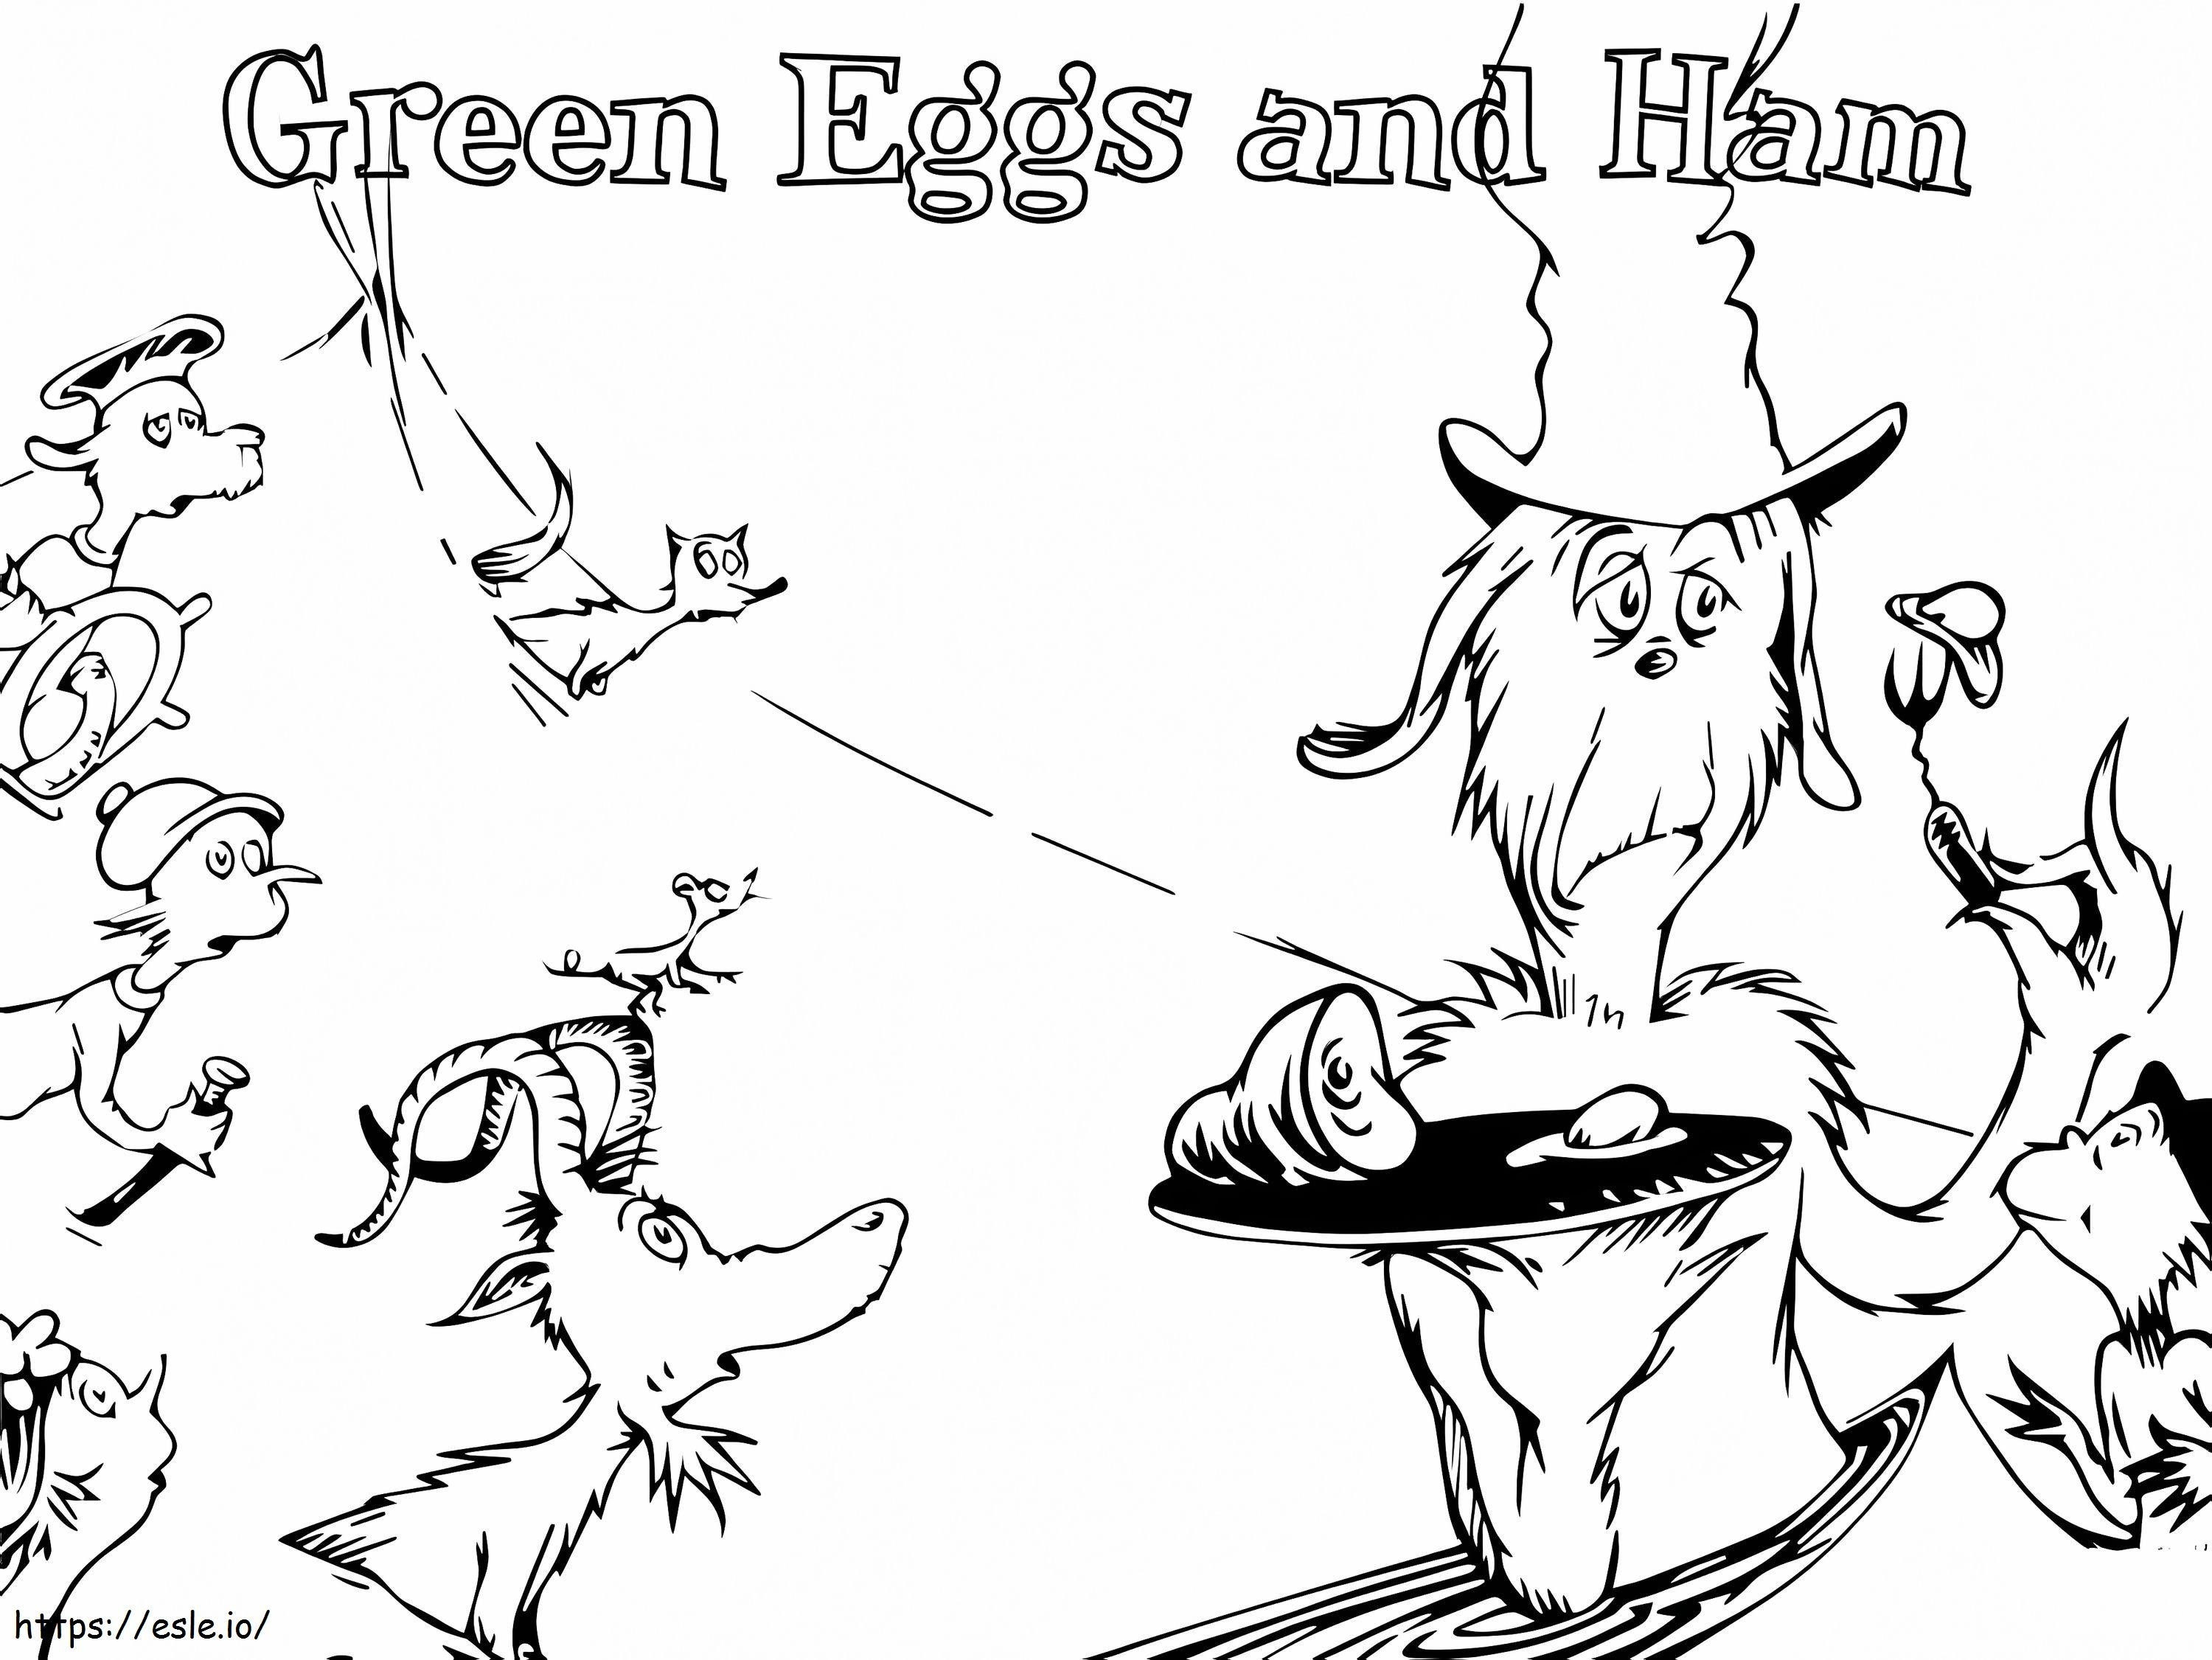 Green Eggs And Ham 11 coloring page